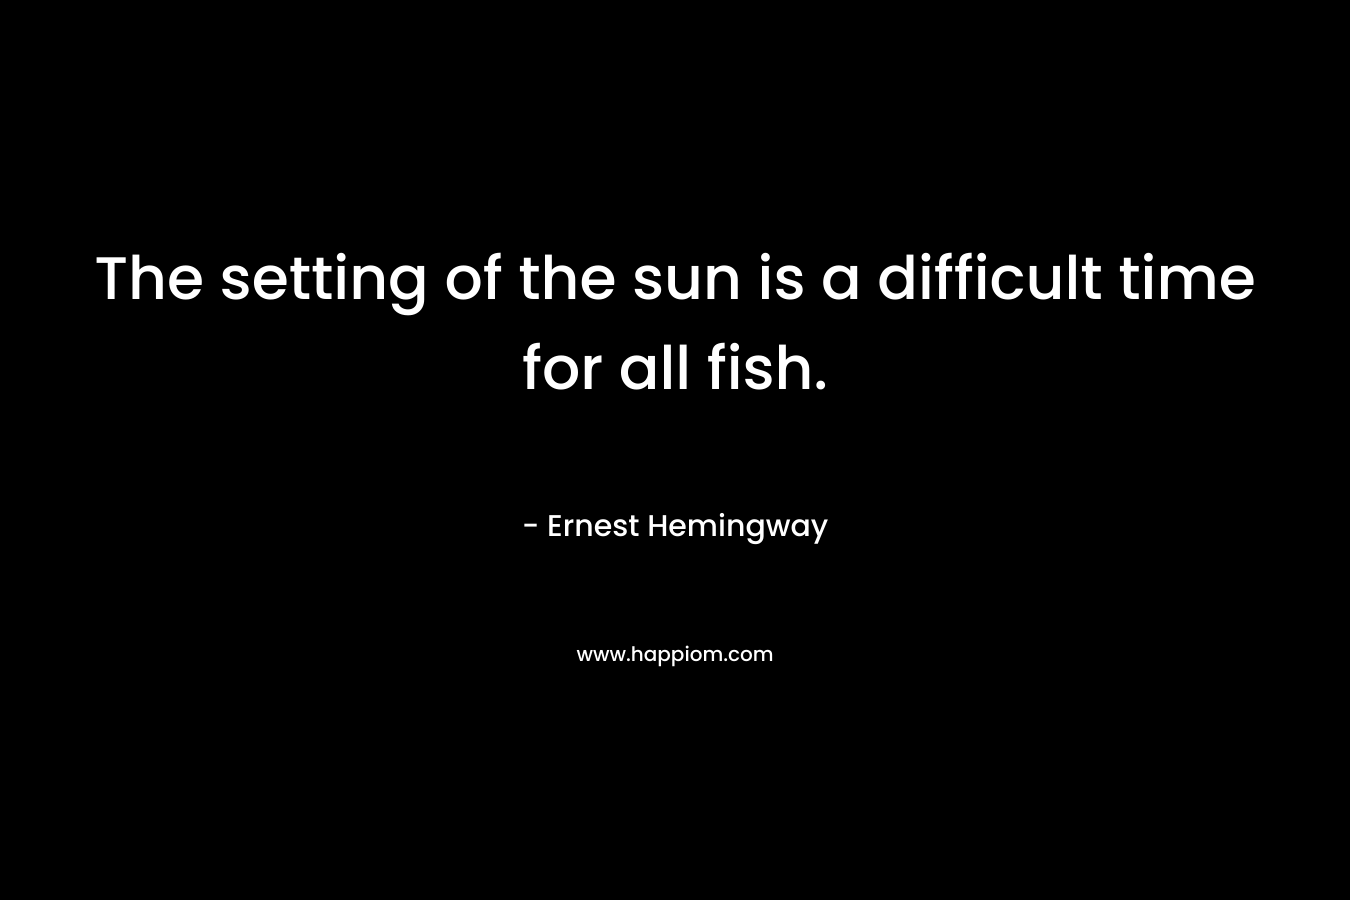 The setting of the sun is a difficult time for all fish. – Ernest Hemingway